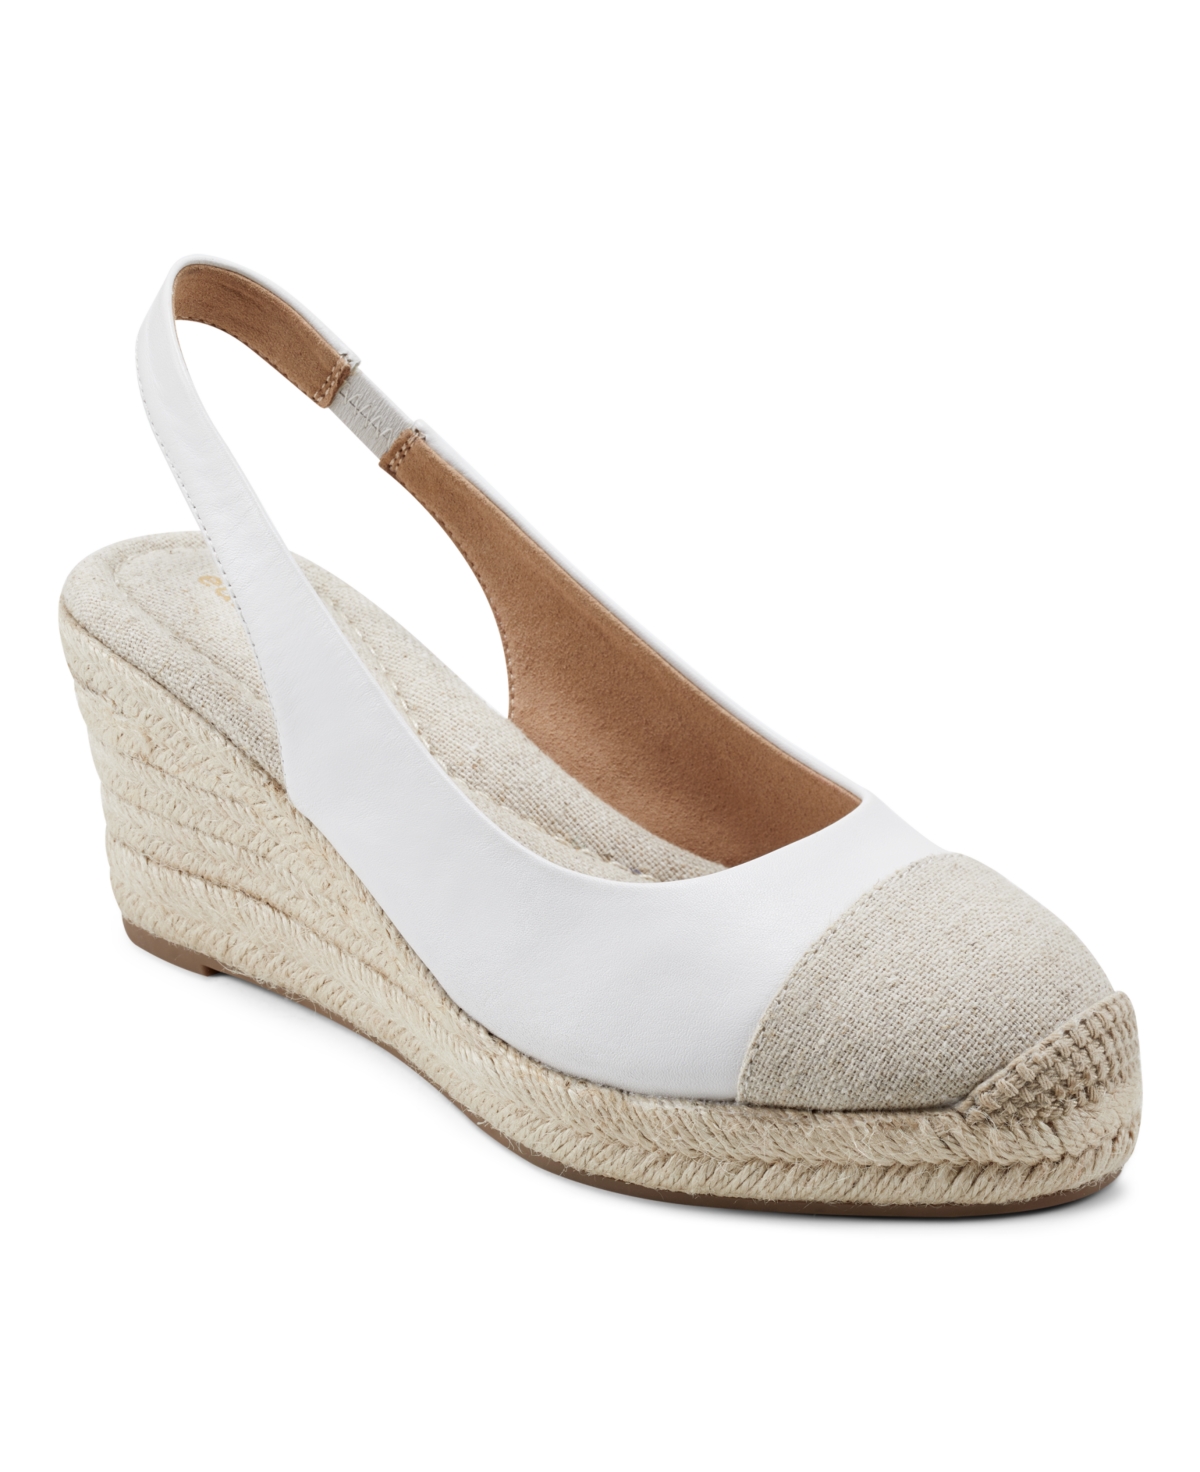 Women's Margie Slingback Espadrille Wedges - Natural, Gold- Textile and Faux Leather